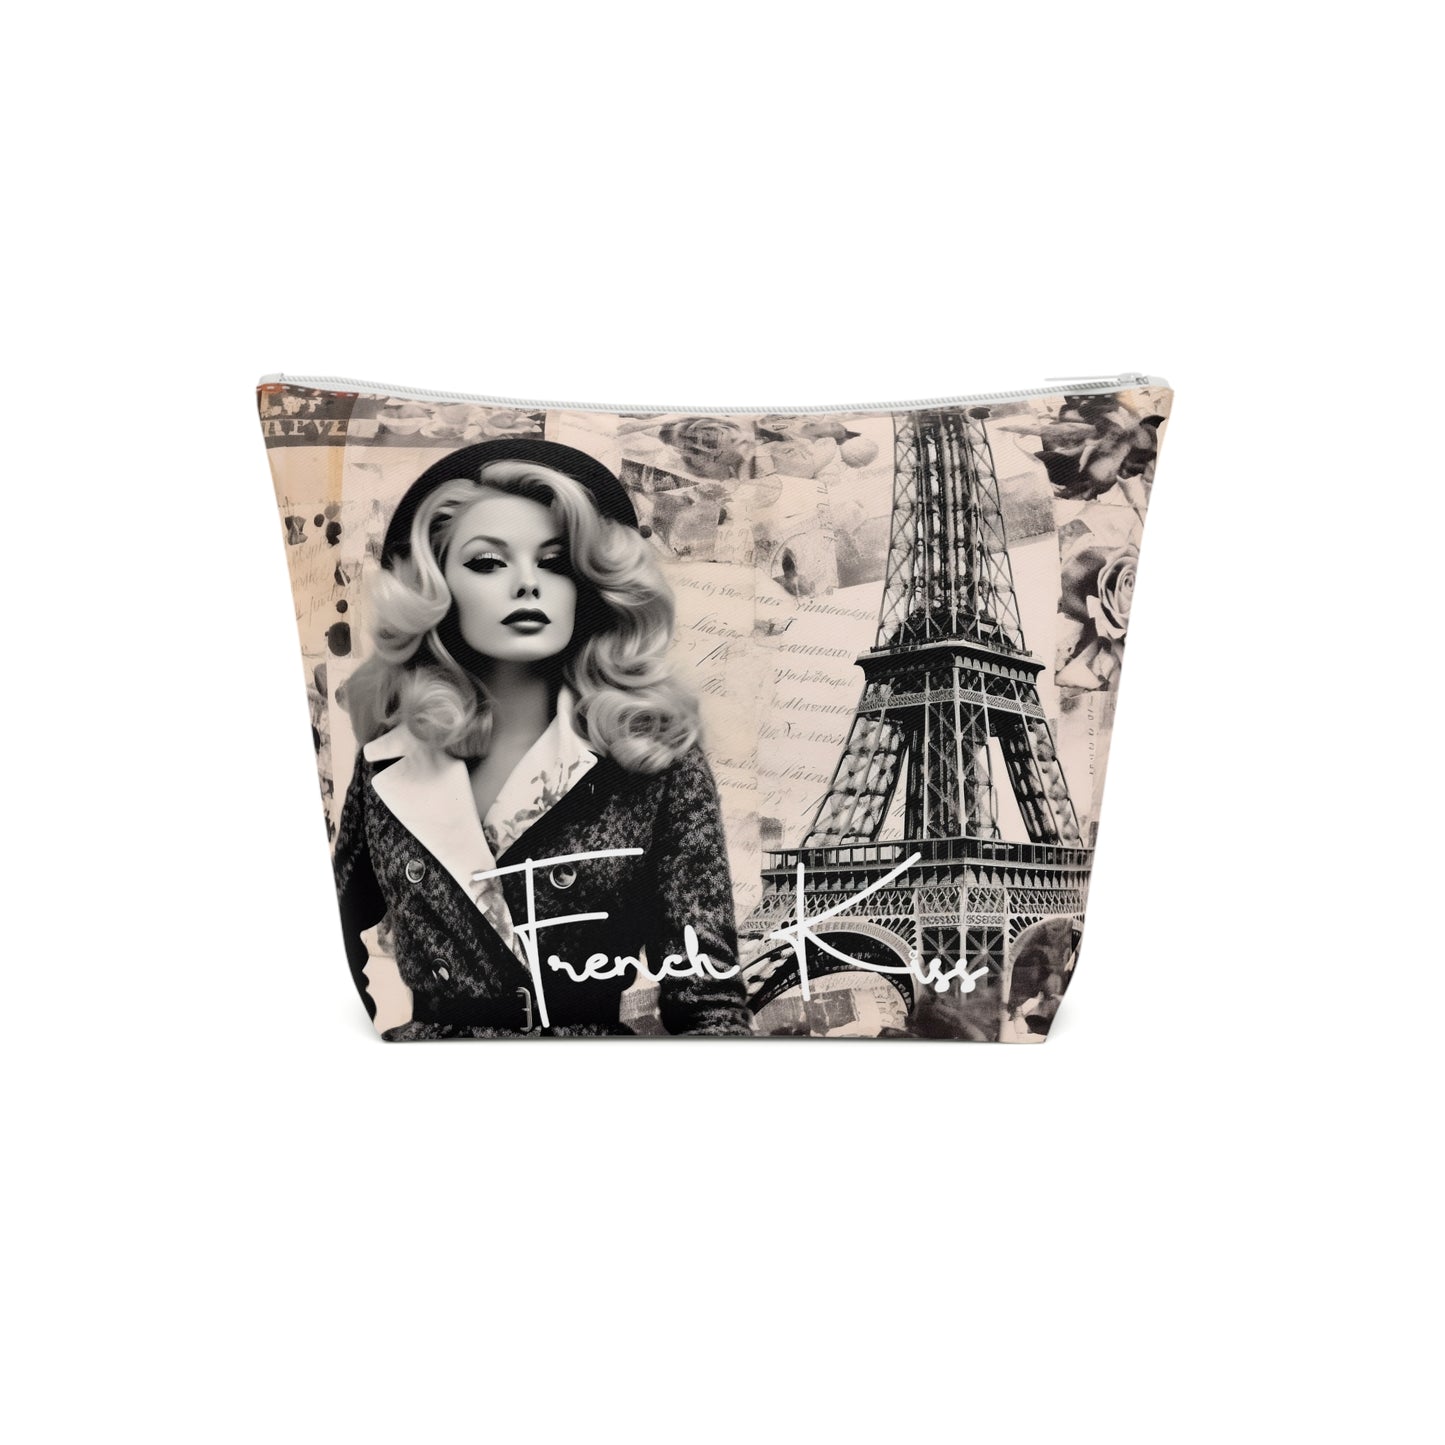 TOUR EIFFEL French Kiss Pop Art, Classy, Cosmetic Bag, Couture, Travel, Fashion, Beauty, must have gift item Cotton Bag